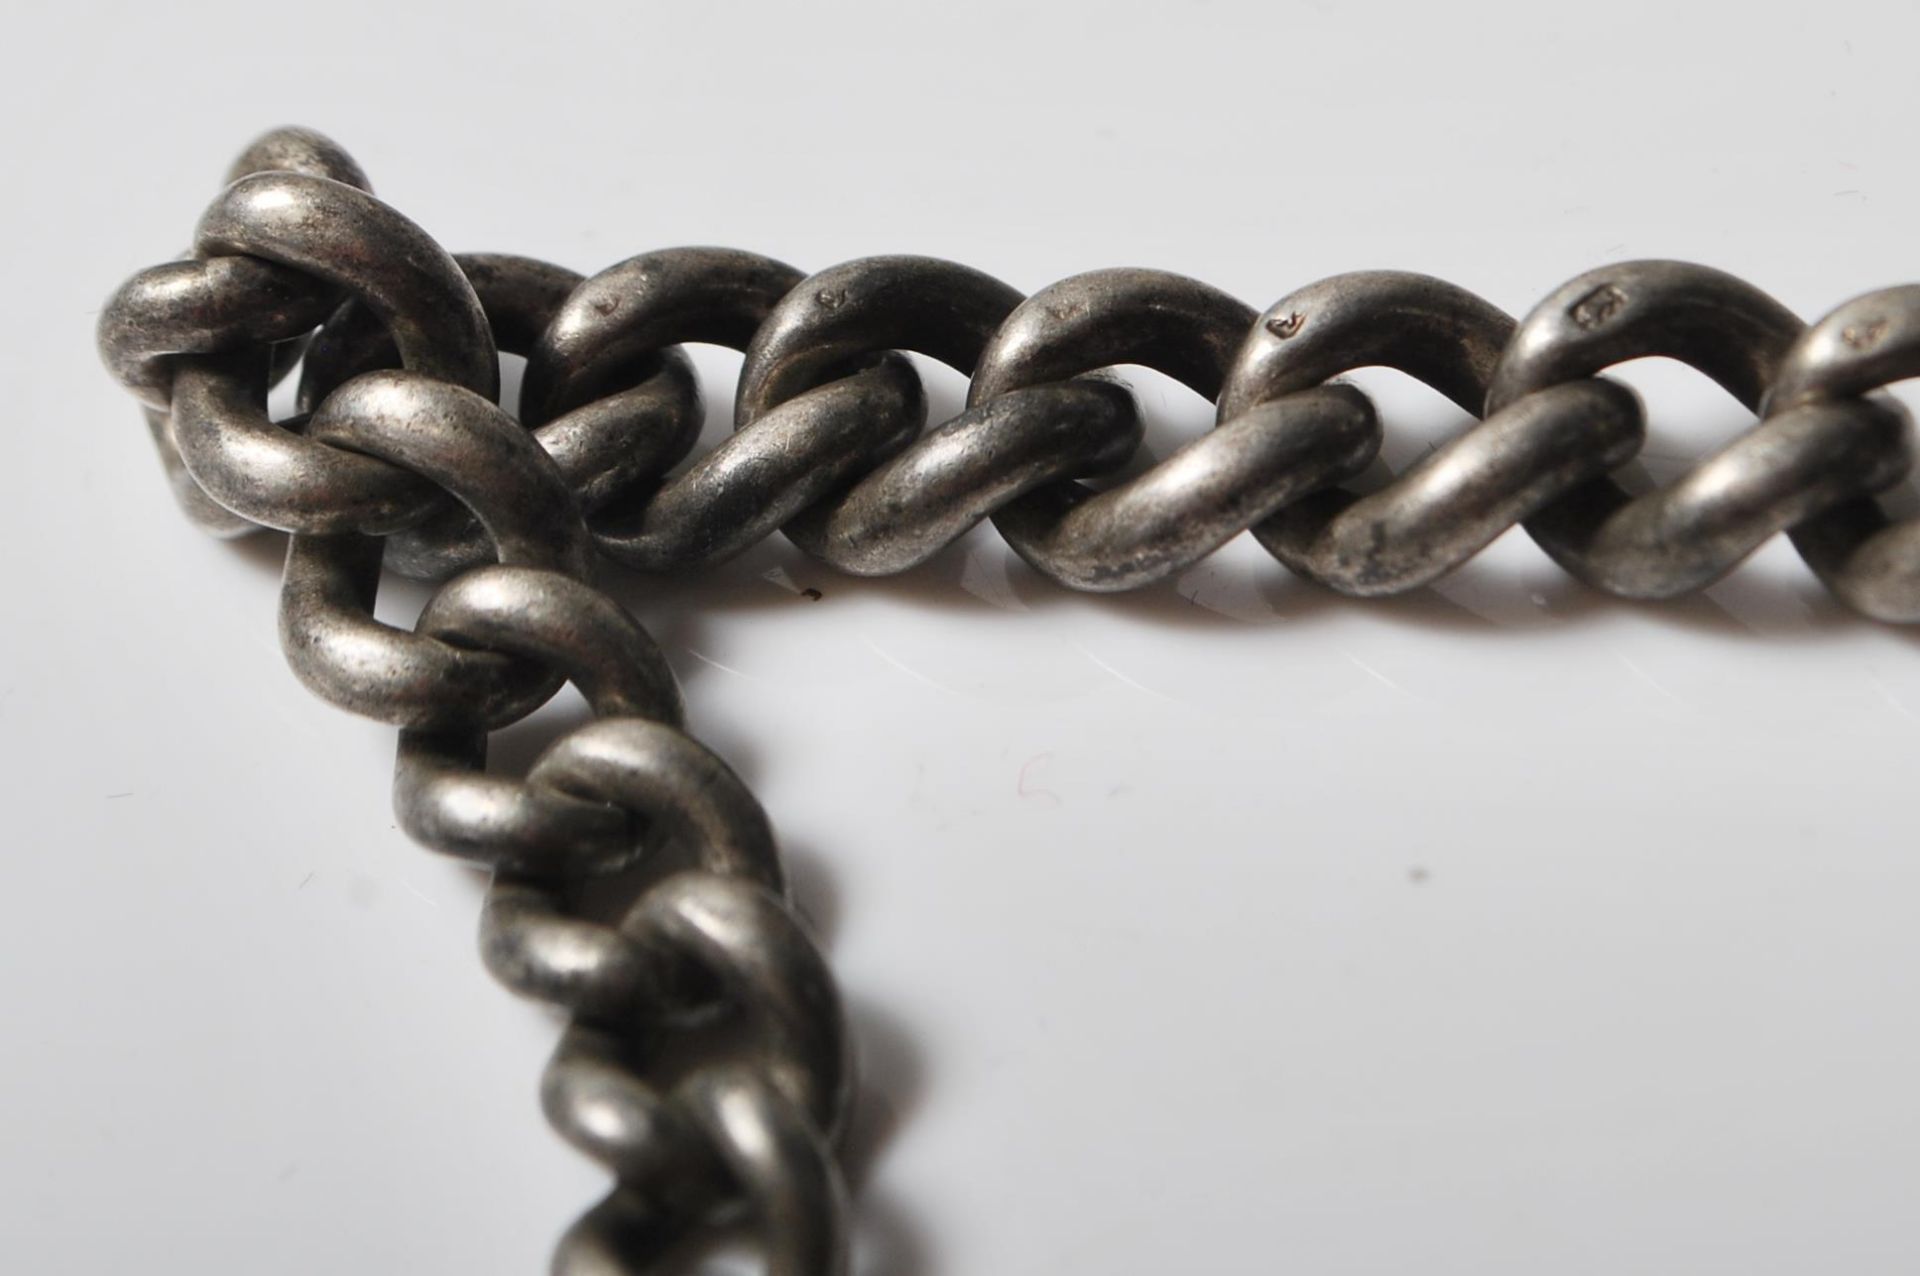 EARLY 20TH CENTURY SILVER POCKET WATCH CHAIN - Image 7 of 7